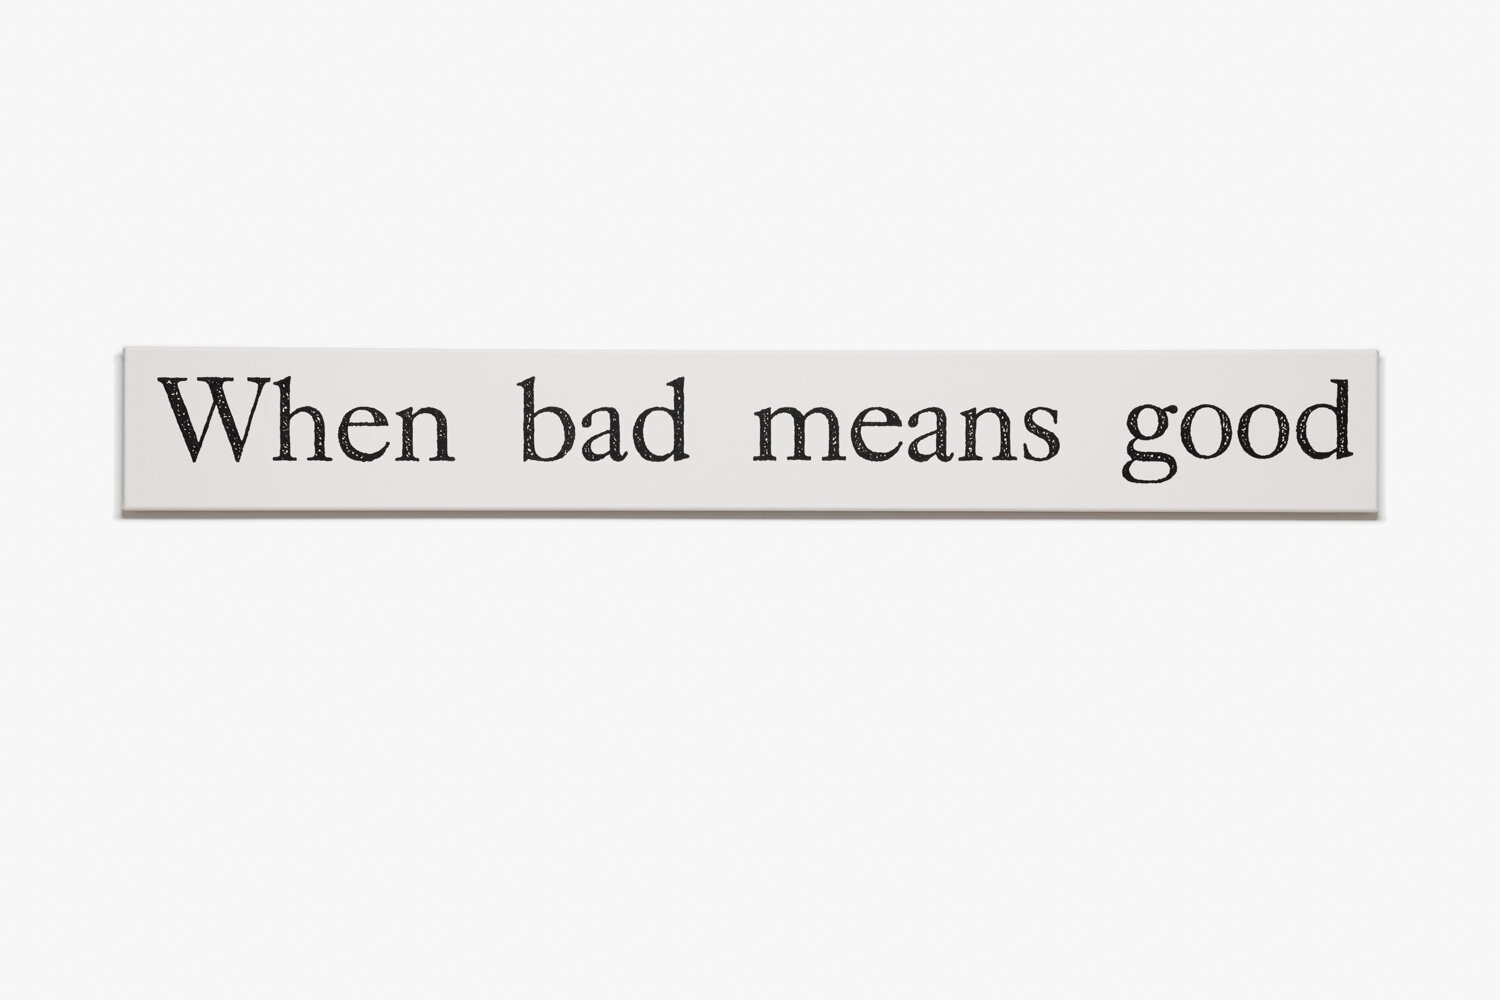  When bad means good (July 15, 1994) 2021